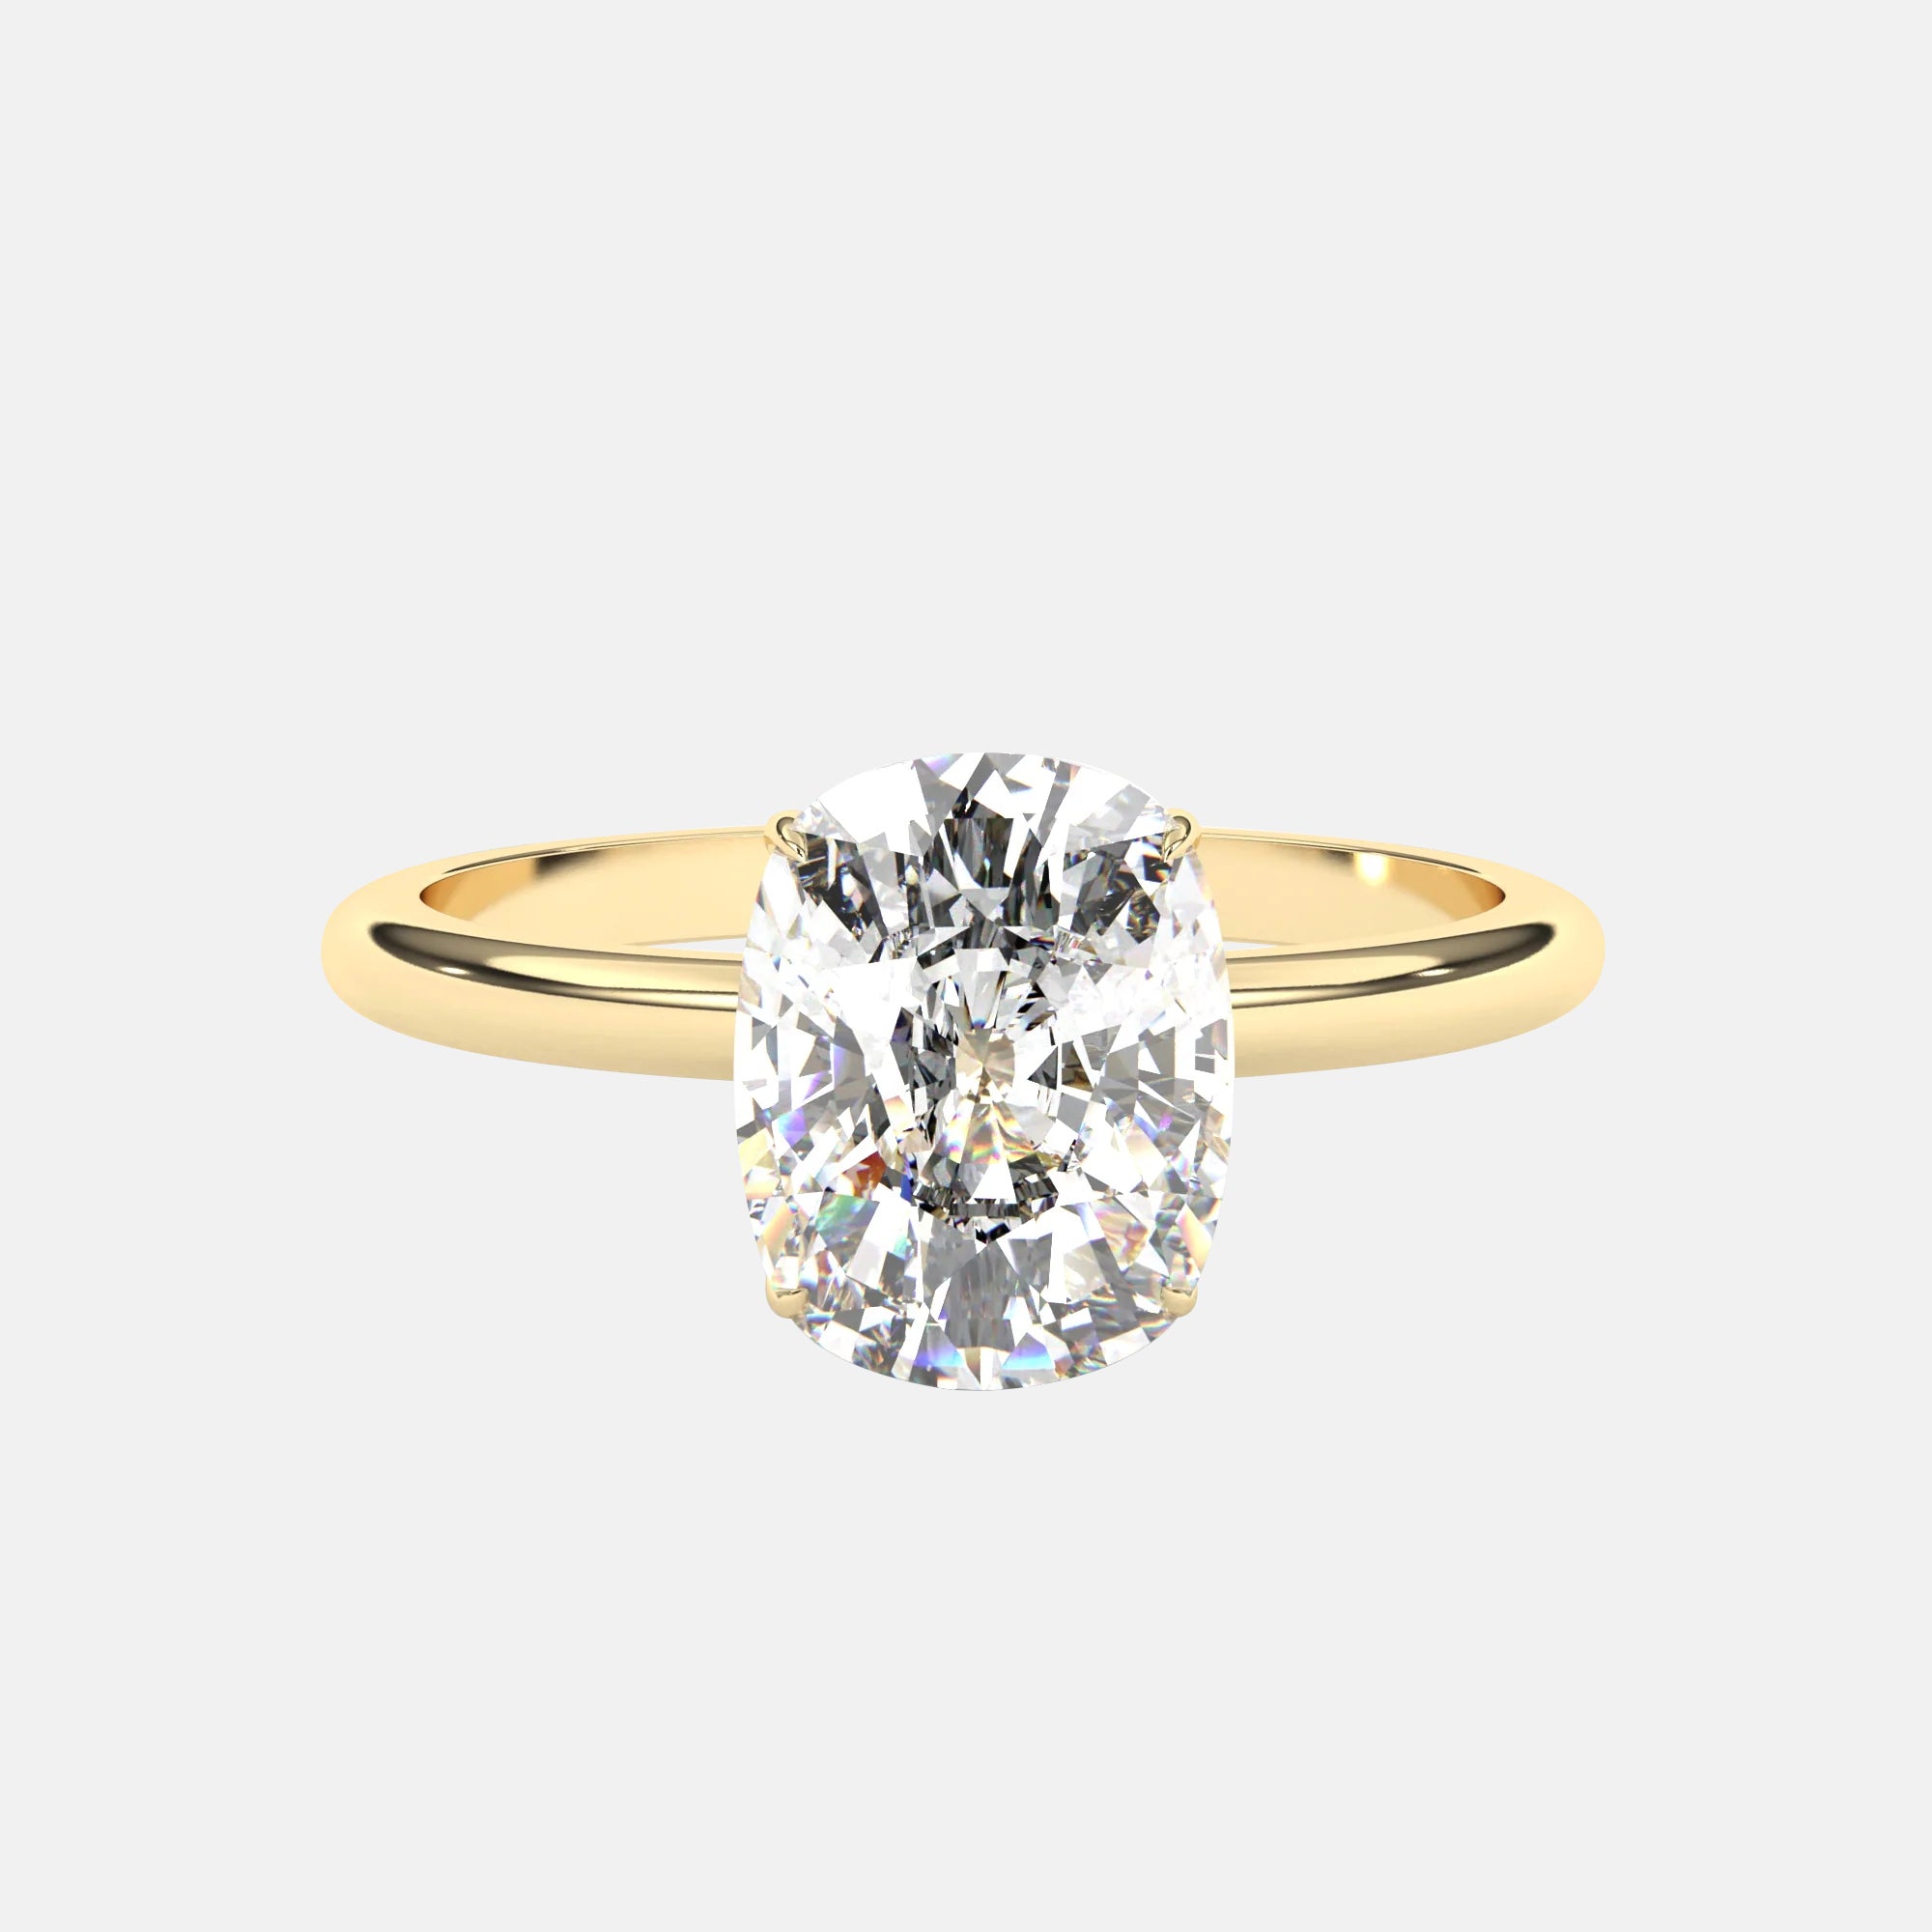 The Ophelia Ring - Elongated Cushion 9x7mm (2.4ct) Moissanite